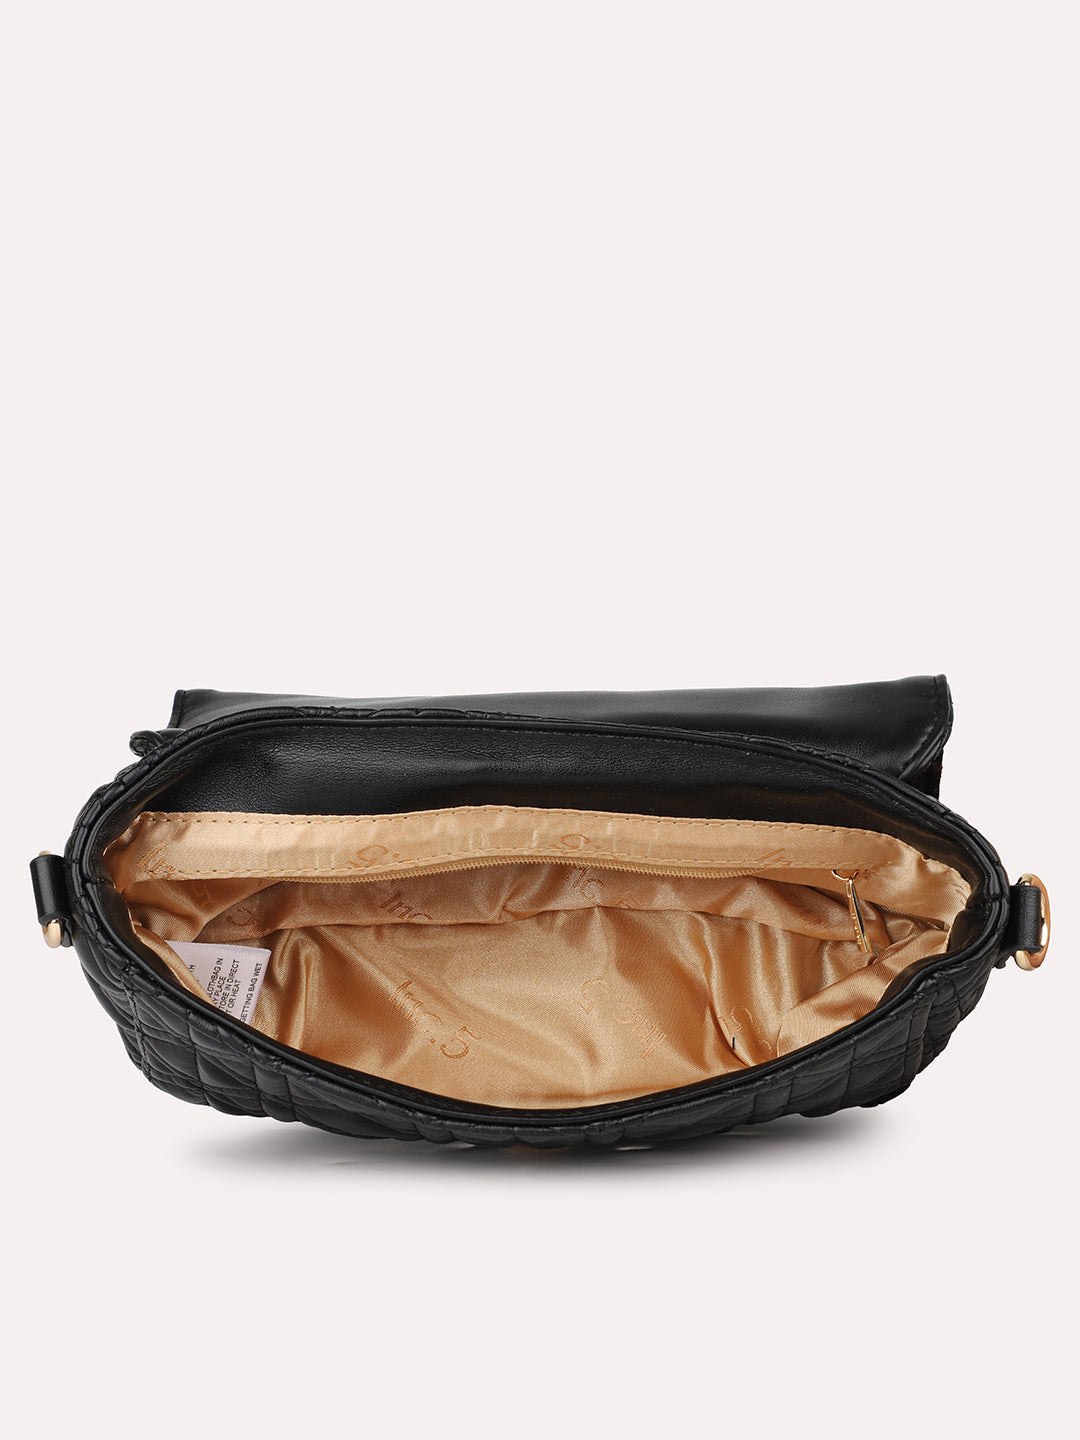 Women Black Textured Structured Sling Bag With Quilted Detailing